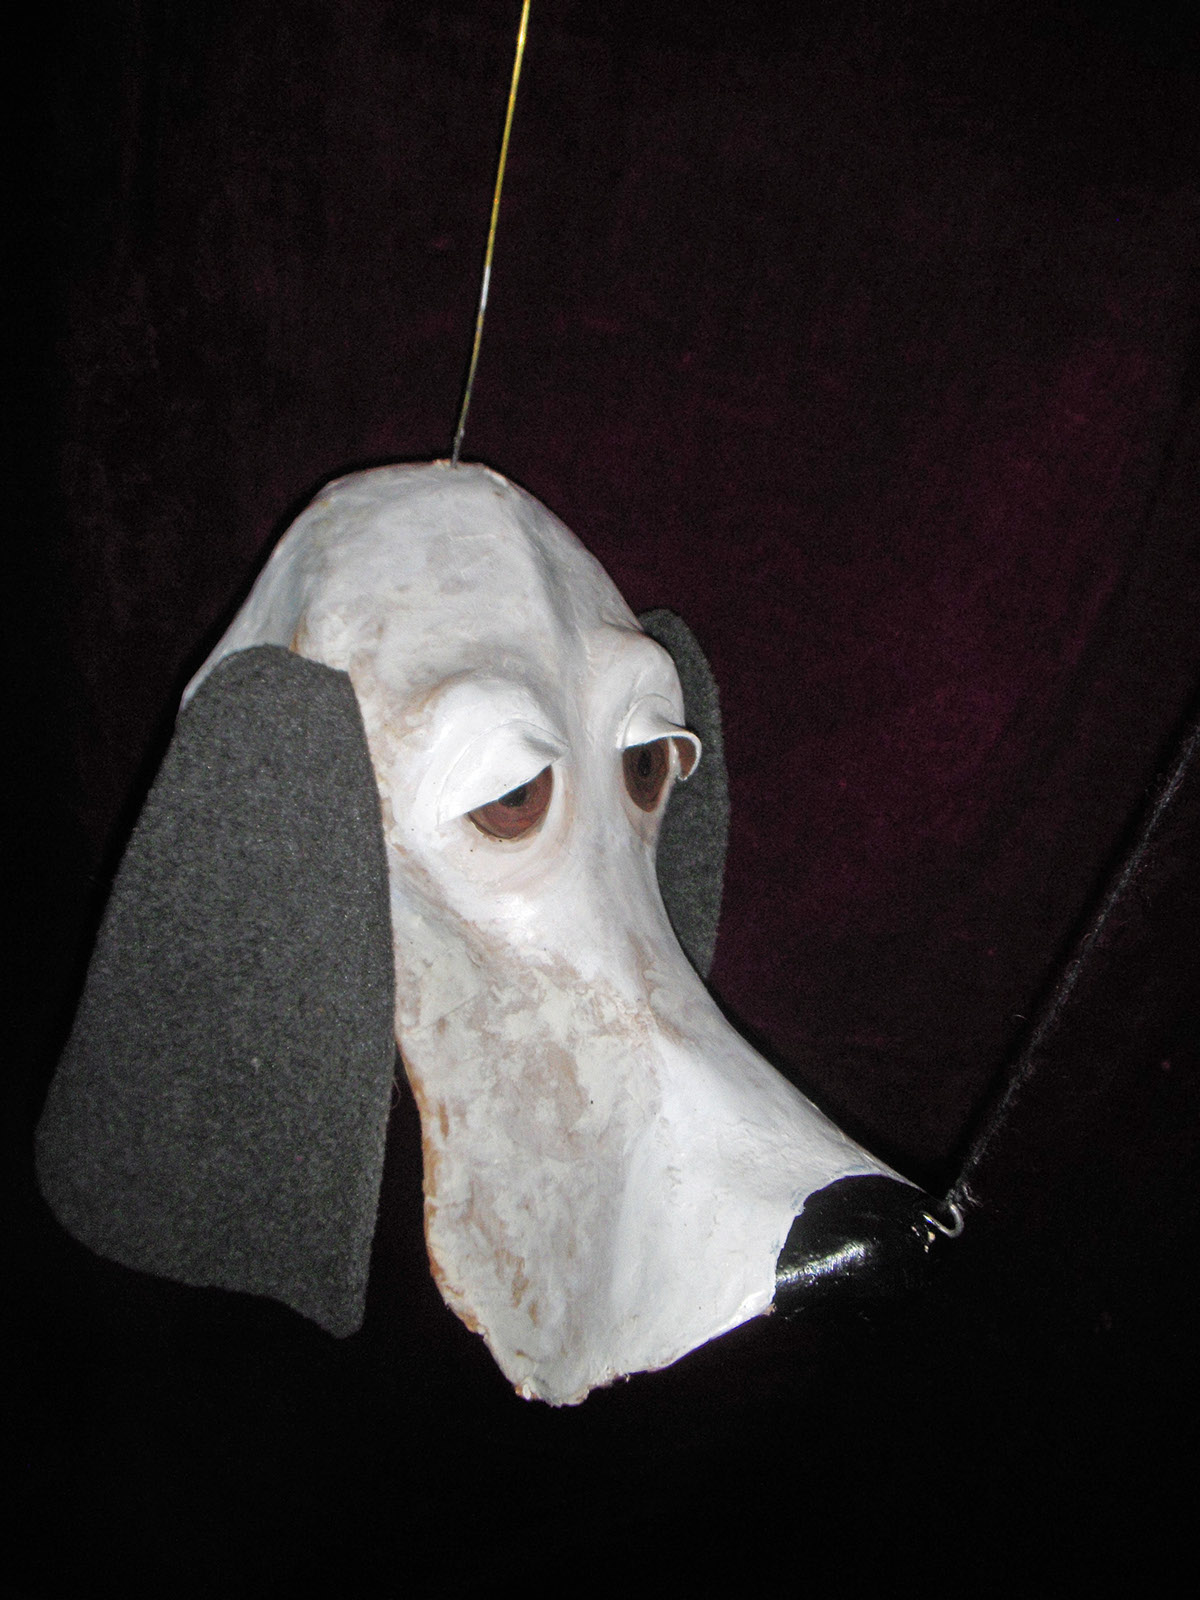 Toy Theater Papier Mache Found objects Object Theater Theater Design masks